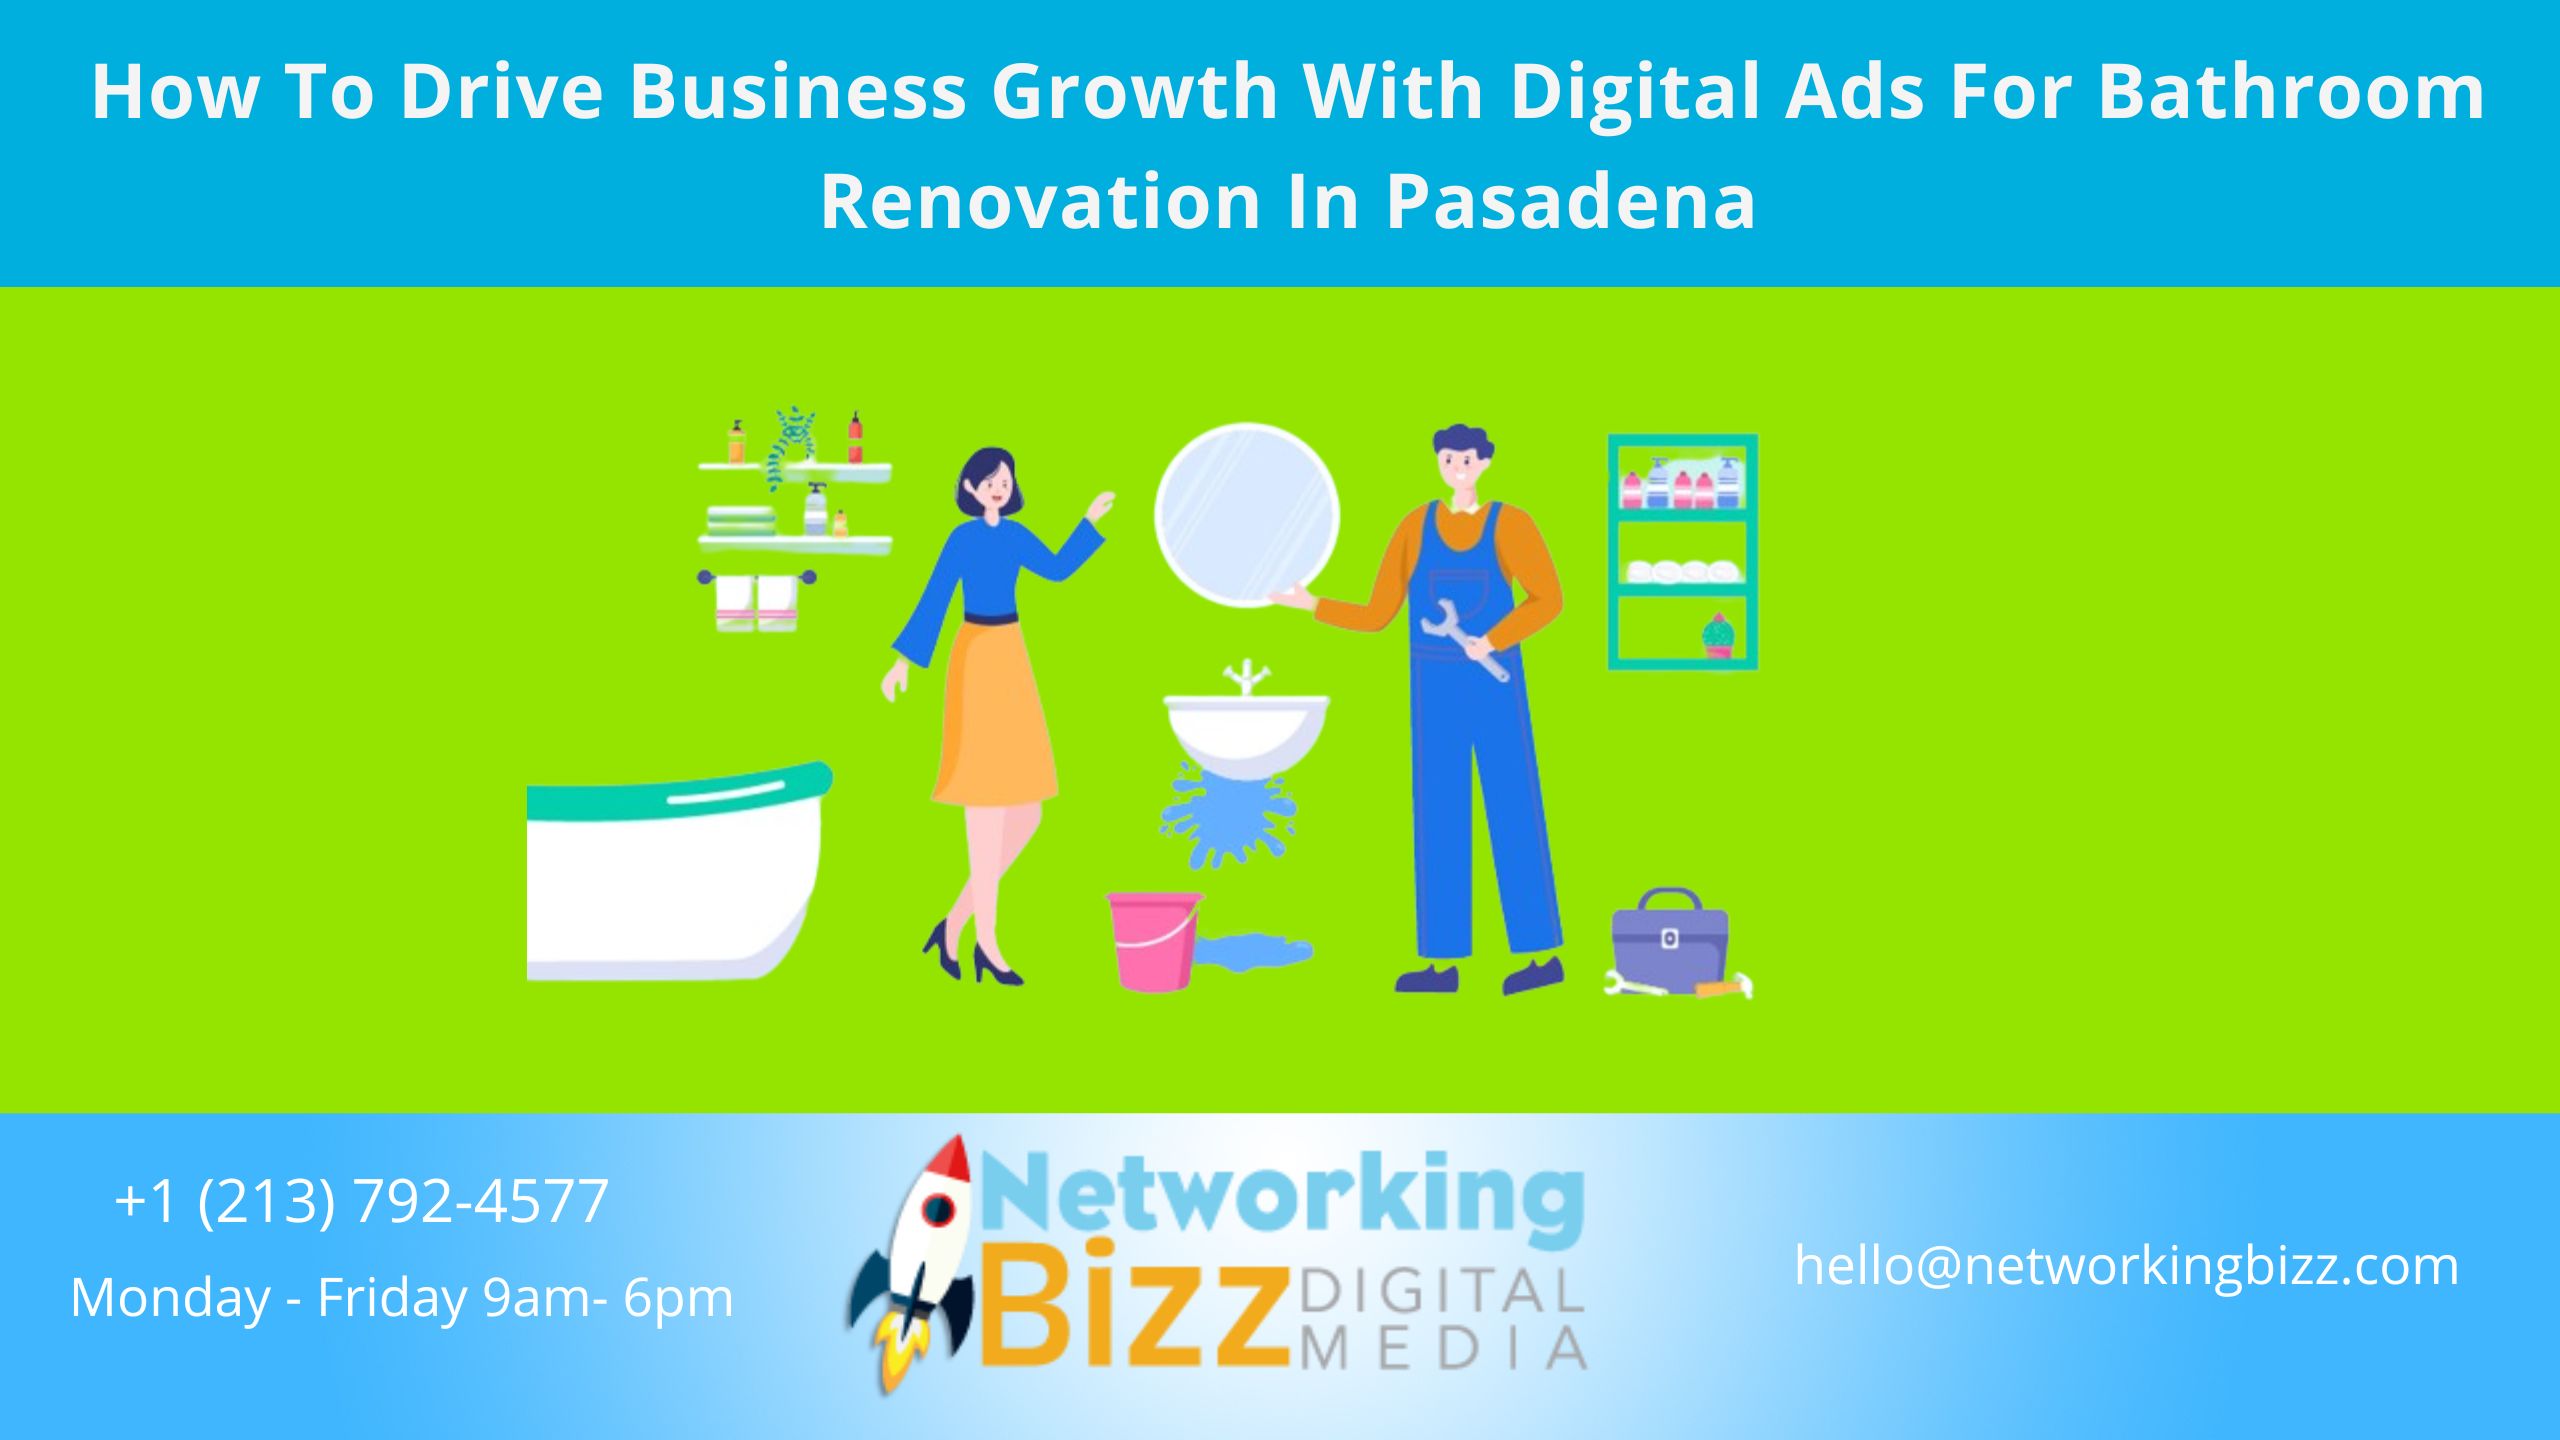 How To Drive Business Growth With Digital Ads For Bathroom Renovation In Pasadena